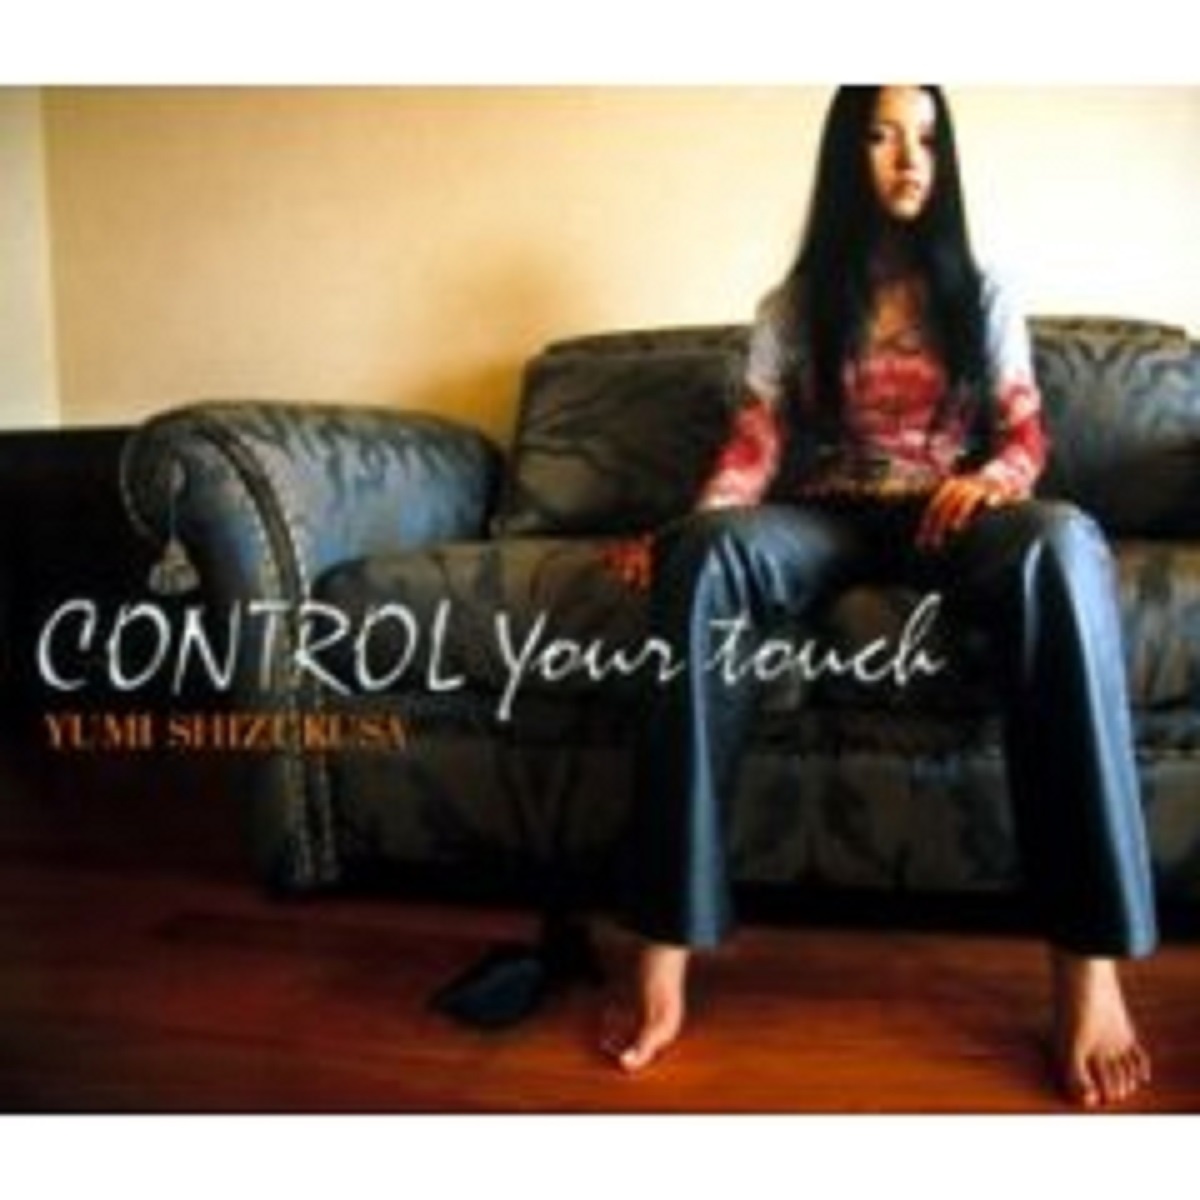 CONTROL Your touch